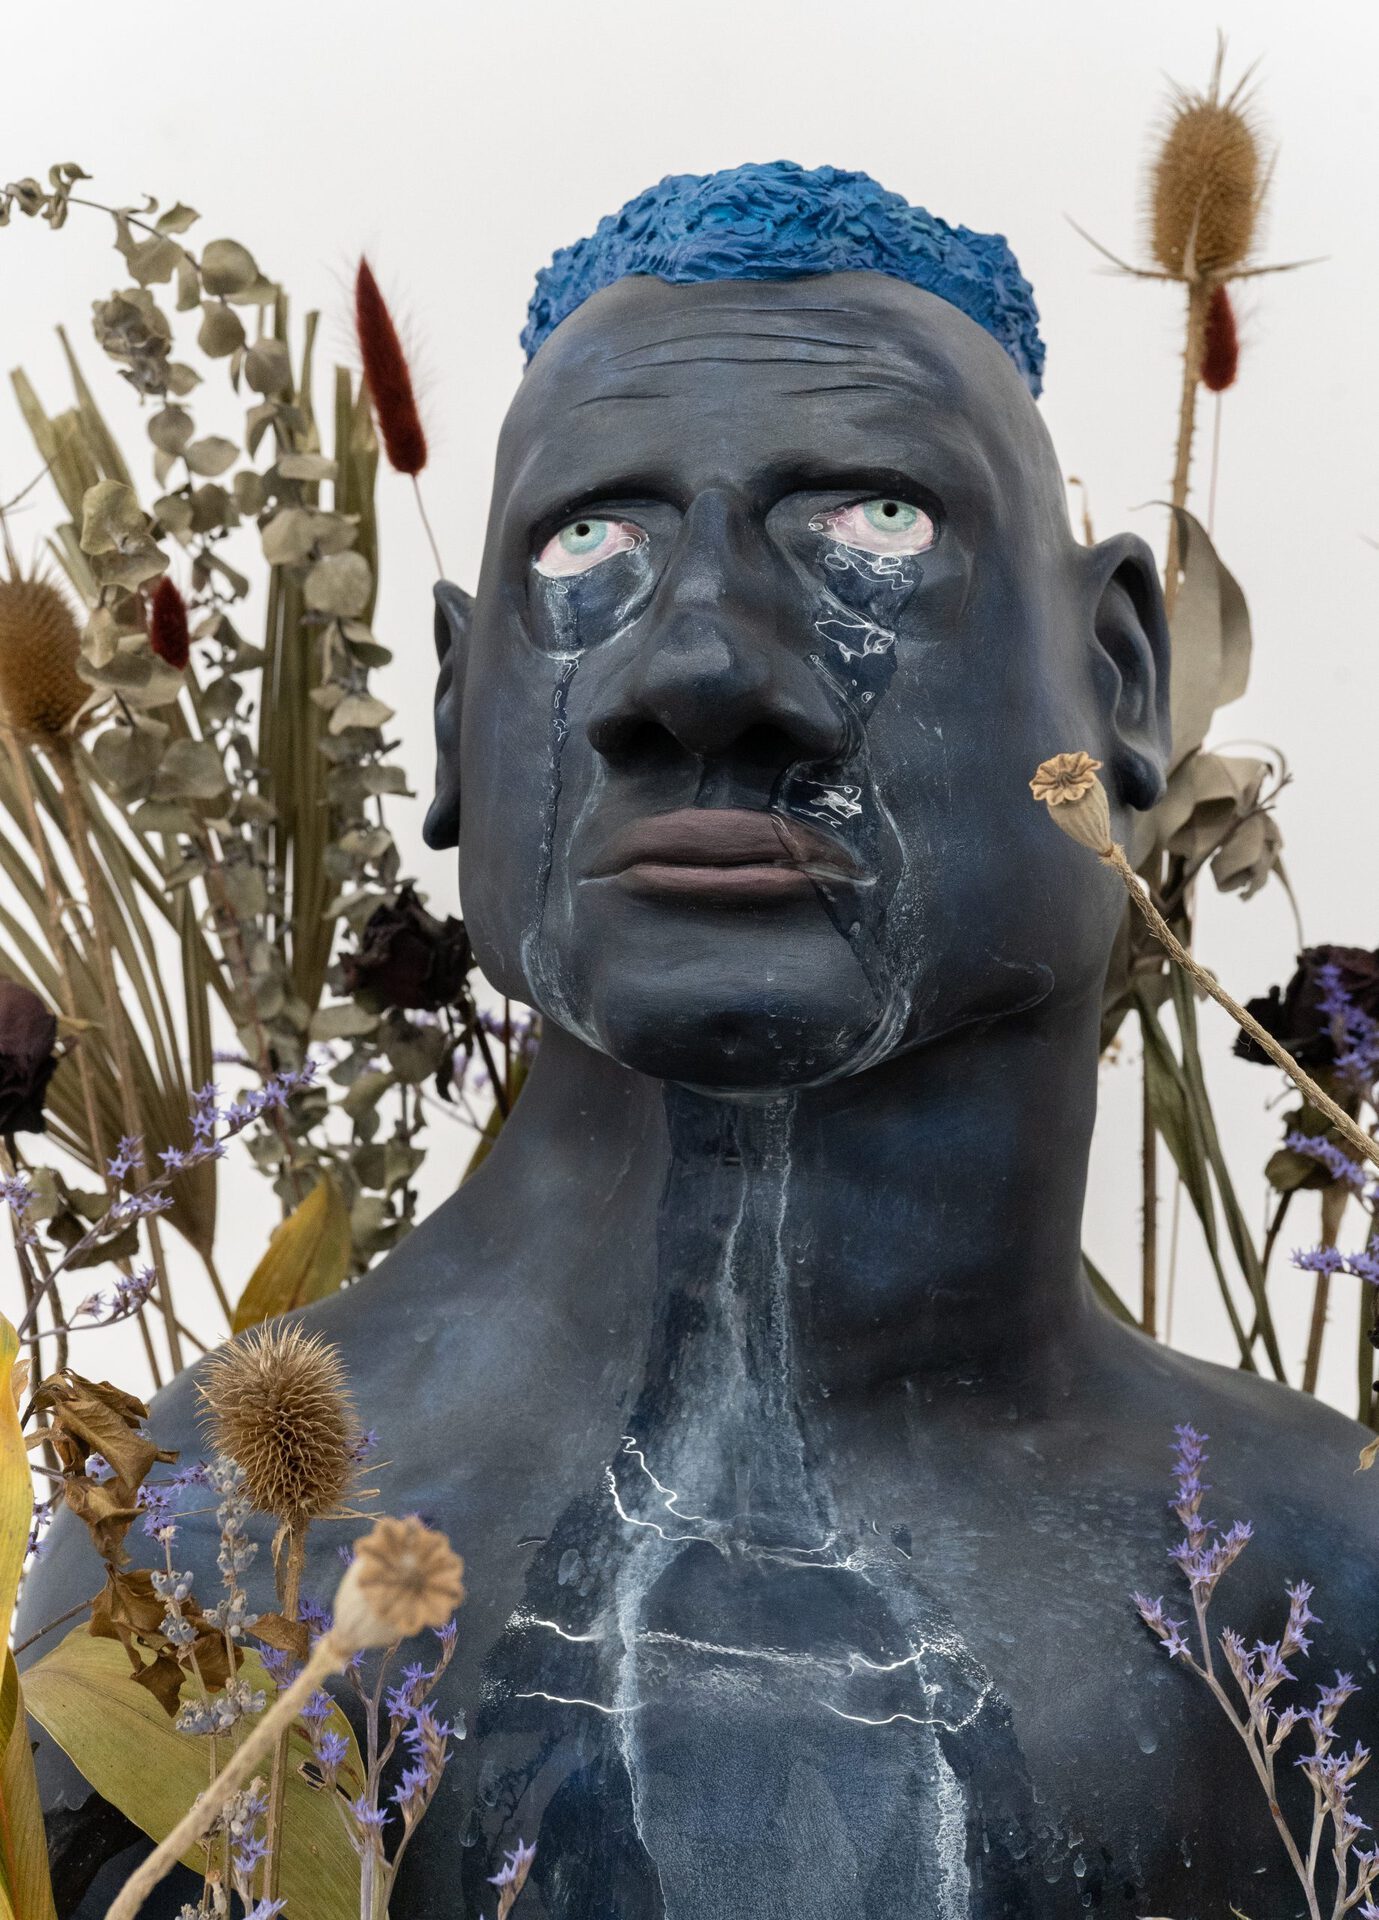 Exhibition view. Lea Rasovszky, Criers (Is it Weird That I Want to Taste Your Tears?), 2019, dyptich, dried flowers, metal support, 150 x 50 x 50 cm. Photo credit: infi.ro